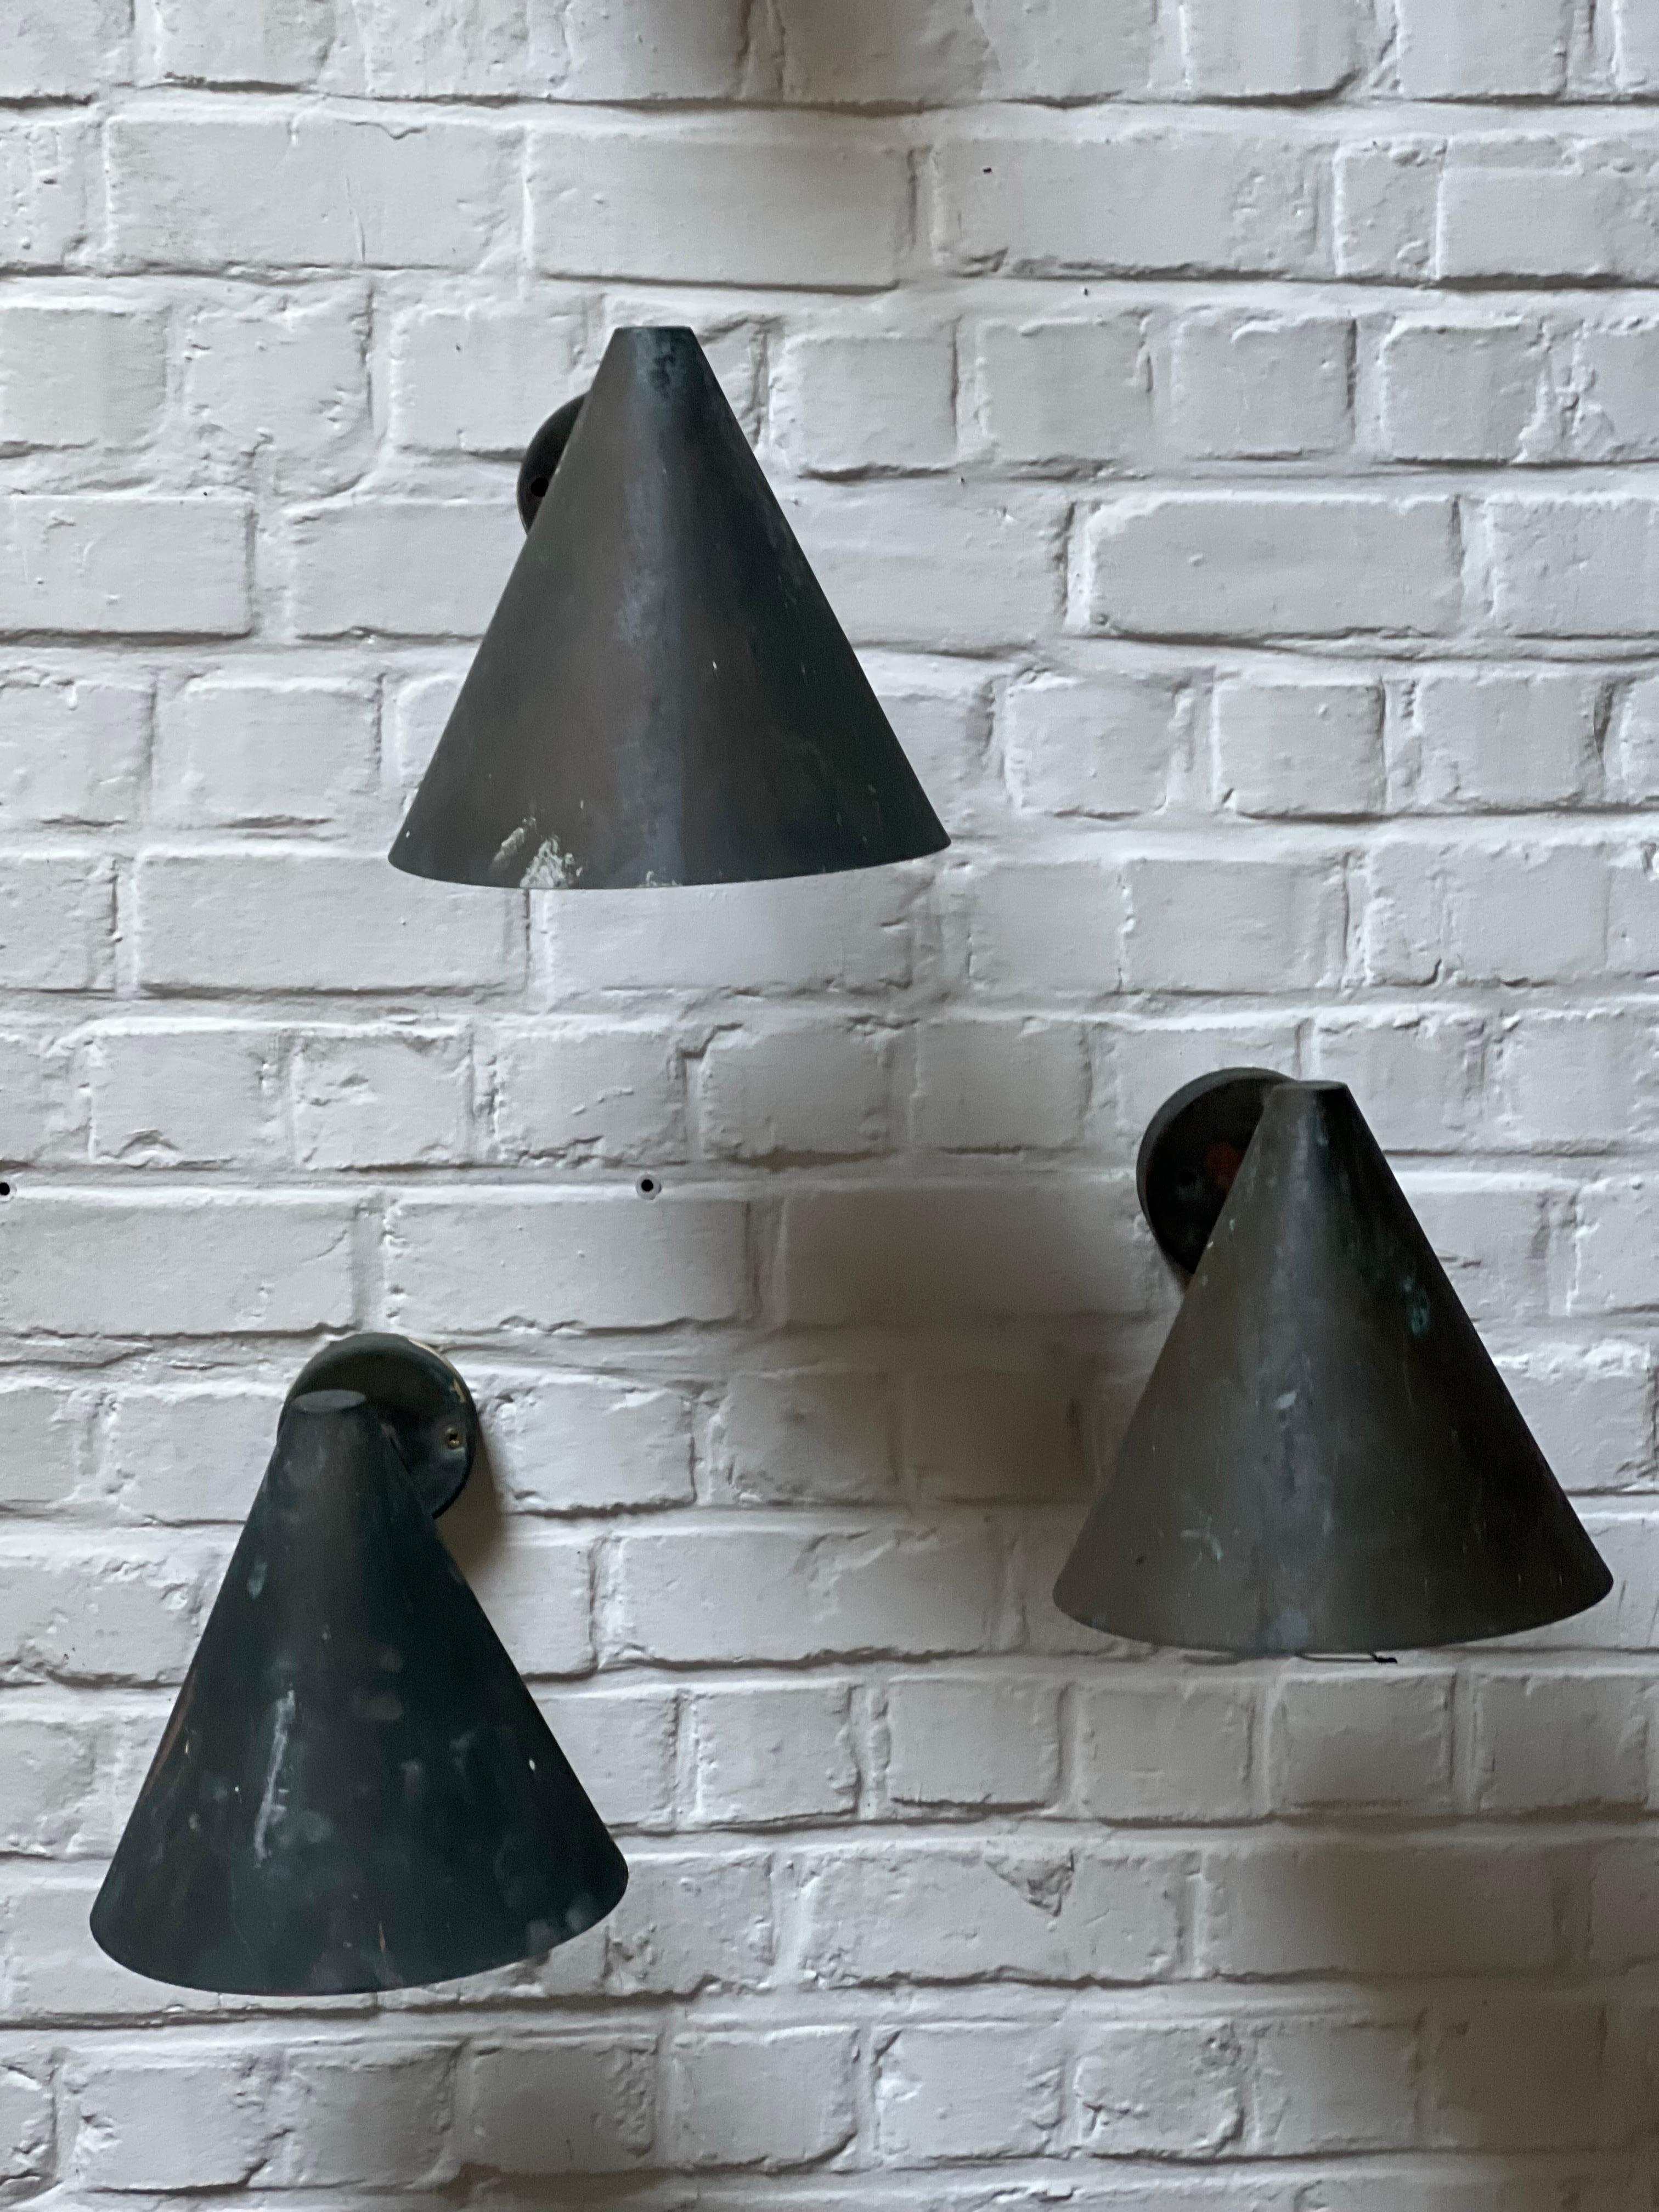 This is the famous conical copper wall lamp from Hans Agne Jakobsson. Made in Sweden in the 1960's. They can be used outside or inside. Very warm shades of green patina on the massive copper lamps. We have 3 lamps available and more on